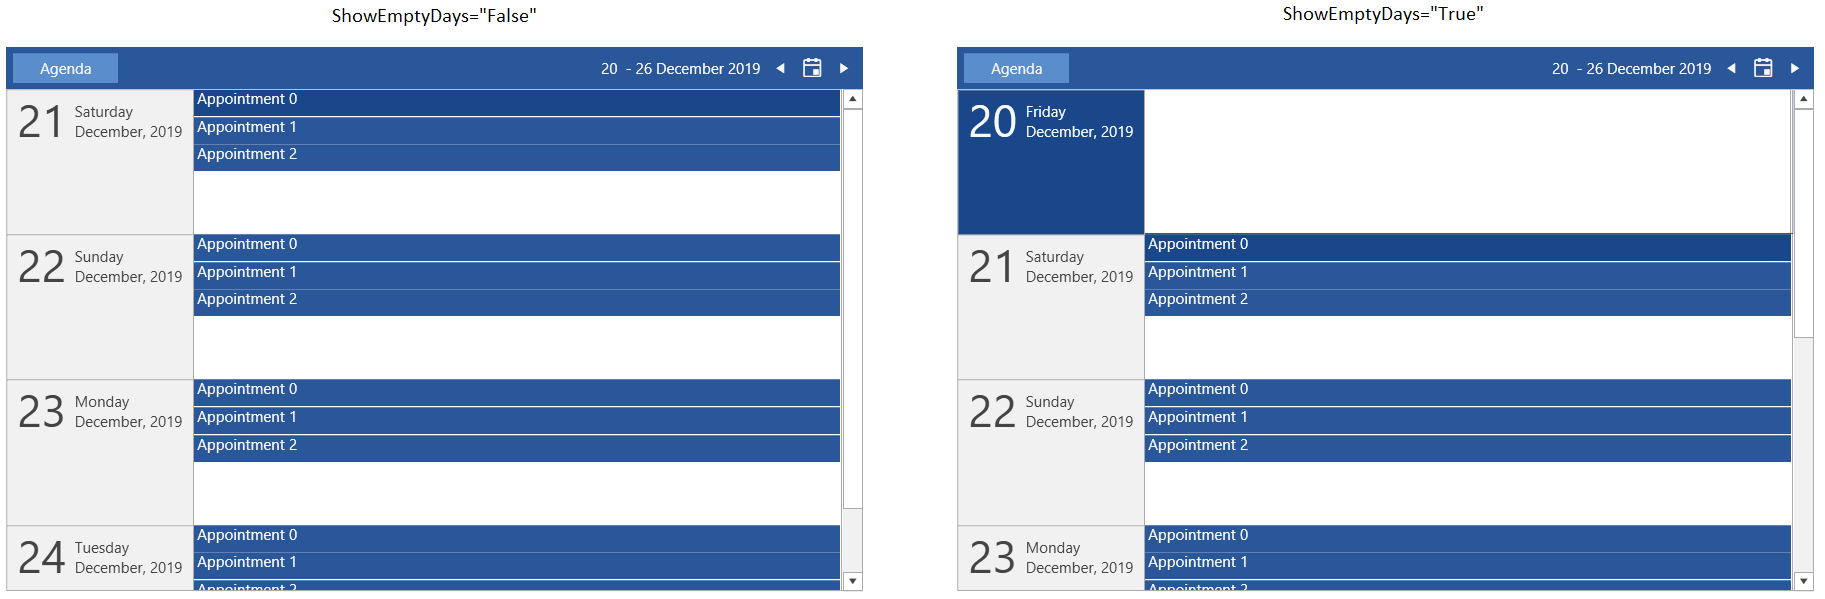 WPF RadScheduleView Setting ShowEmptyDays with appointments (comparison)